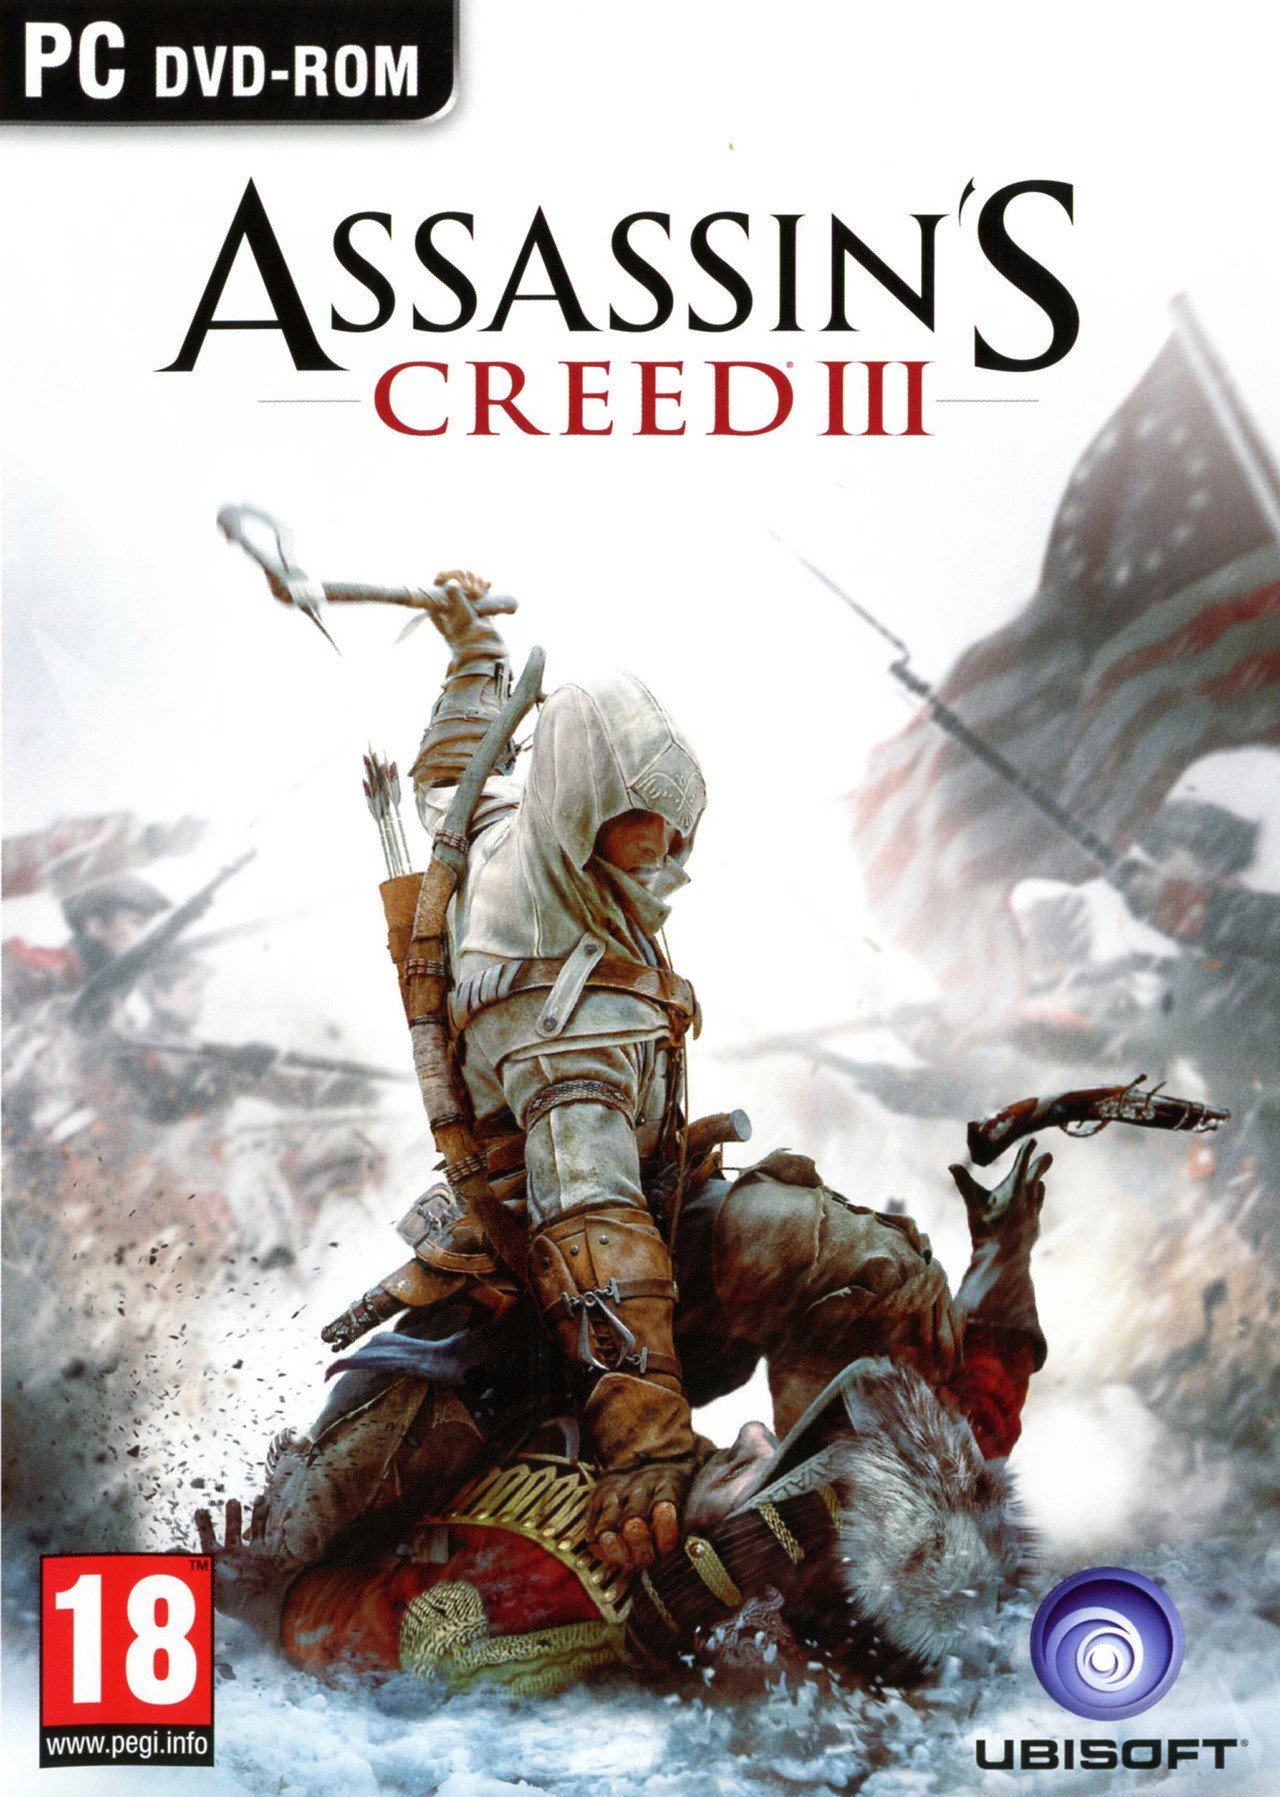 jaquette-assassin-s-creed-iii-pc-cover-avant-g-1353403494.jpg